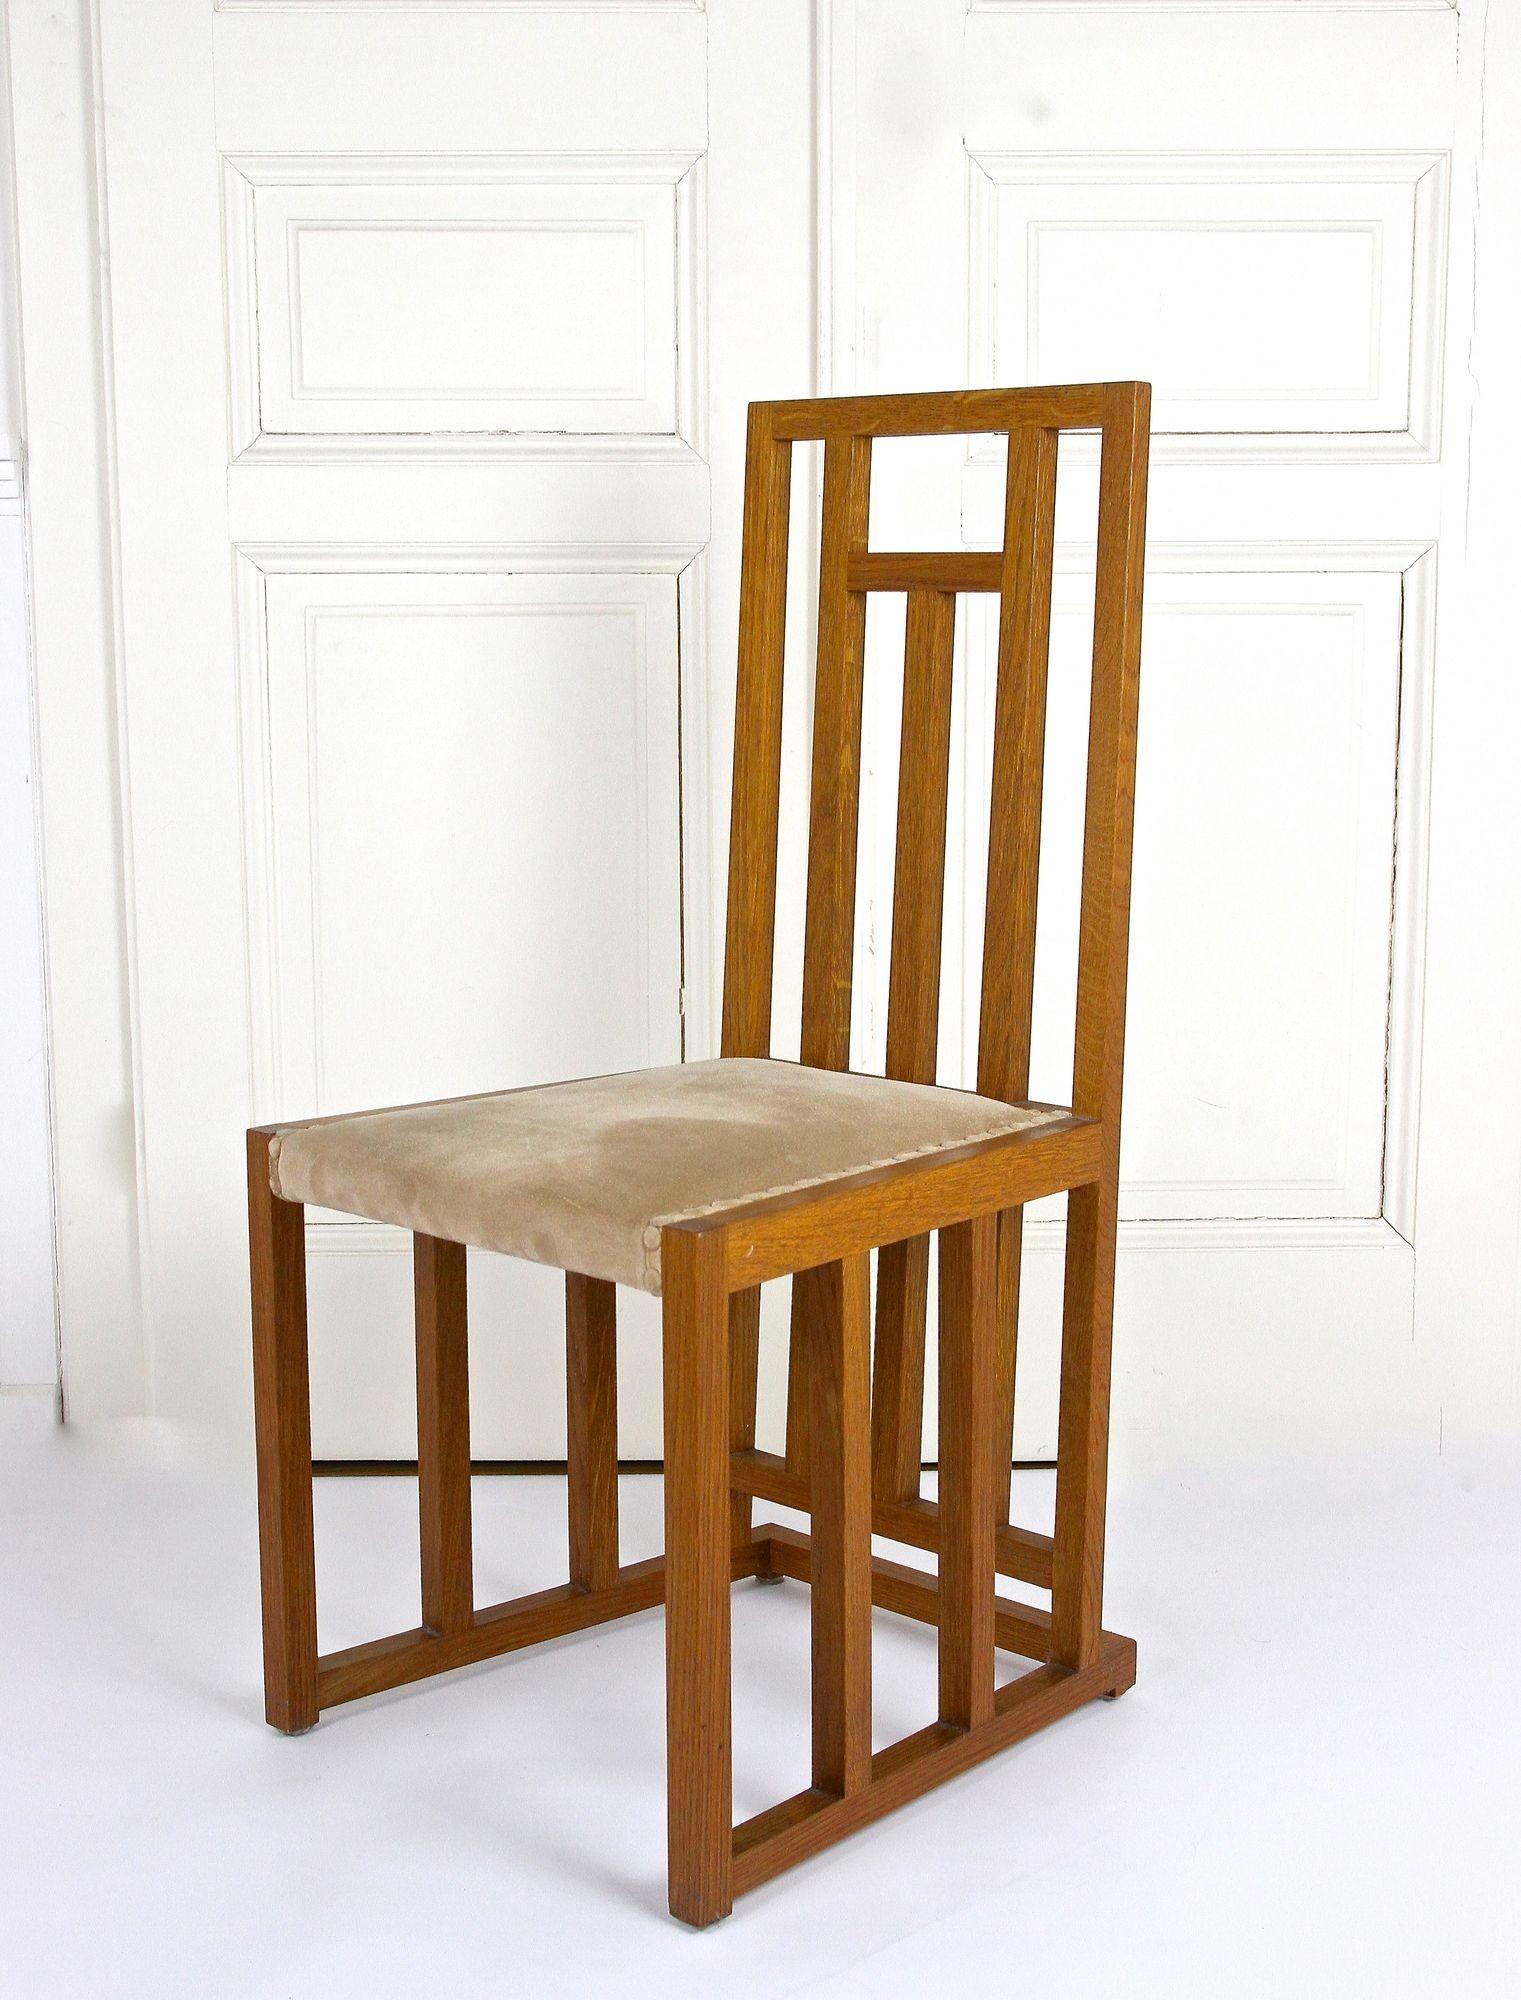 Set Of 6 Art Nouveau Dining Chairs by Josef Hoffmann, 20th Century, AT ca. 1901 For Sale 6